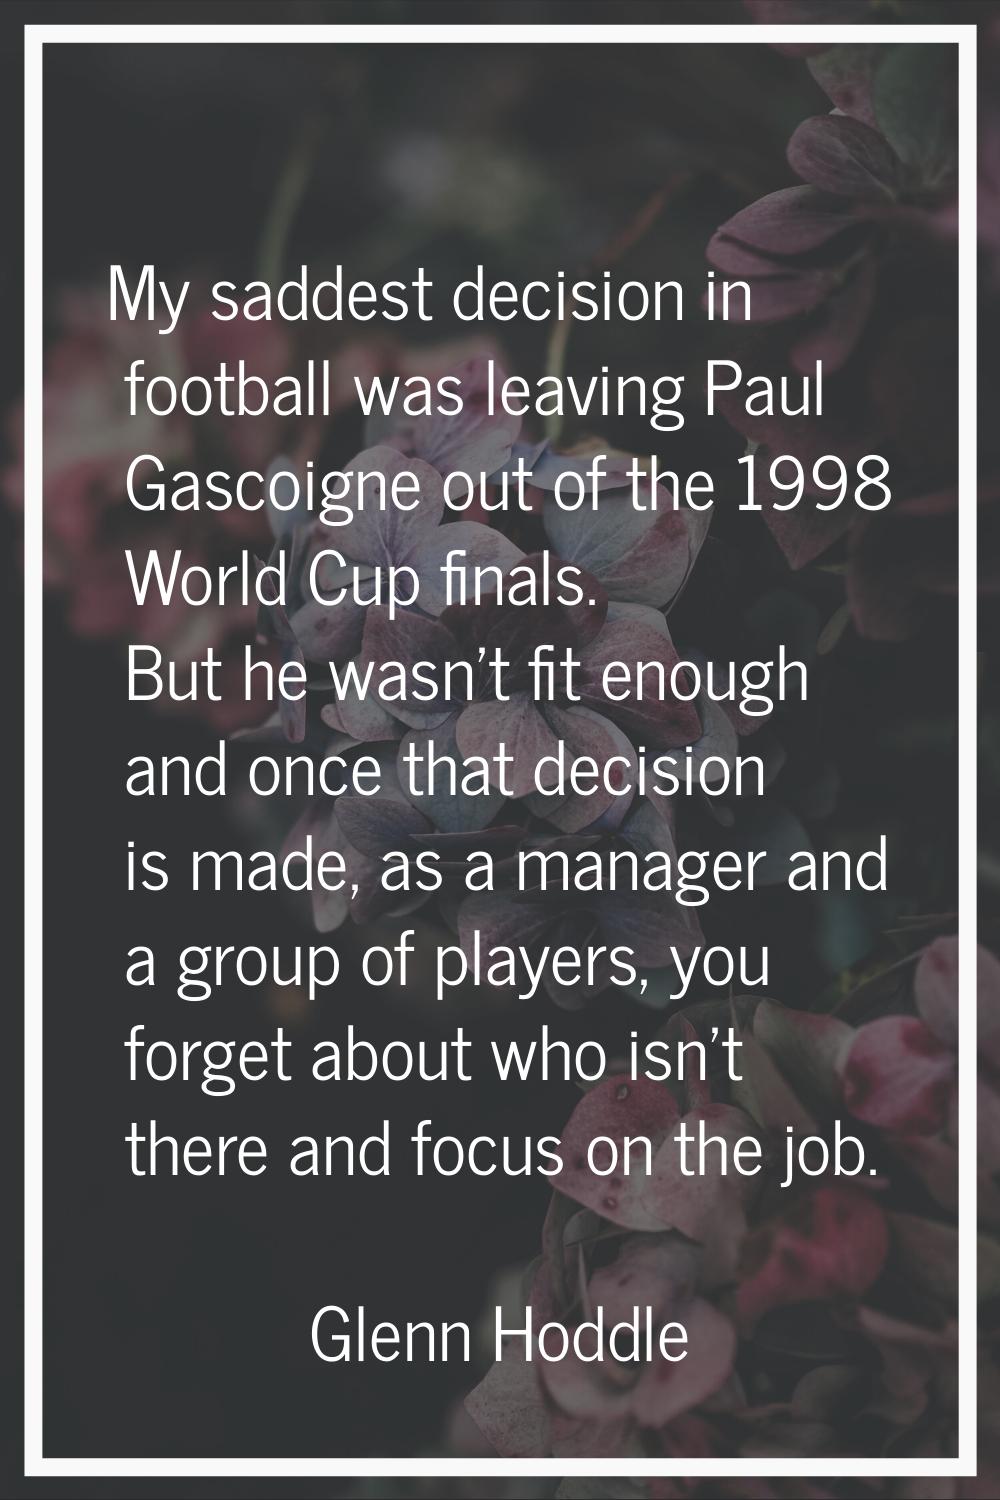 My saddest decision in football was leaving Paul Gascoigne out of the 1998 World Cup finals. But he